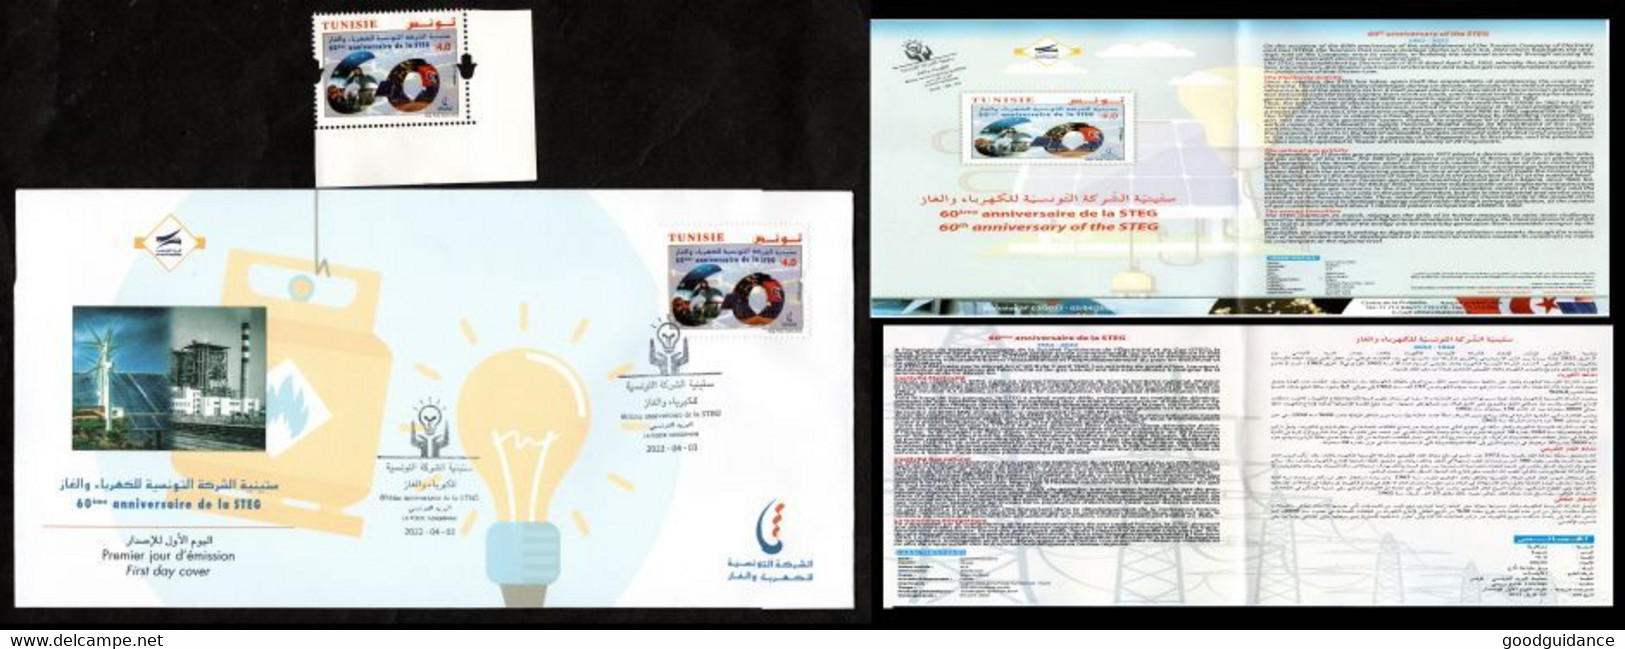 2022 - Tunisia - 60th Anniversary Of The STEG - Electricity- Gaz - Energy- Flyer+ FDC + Compl.set 1v.MNH** - Usines & Industries